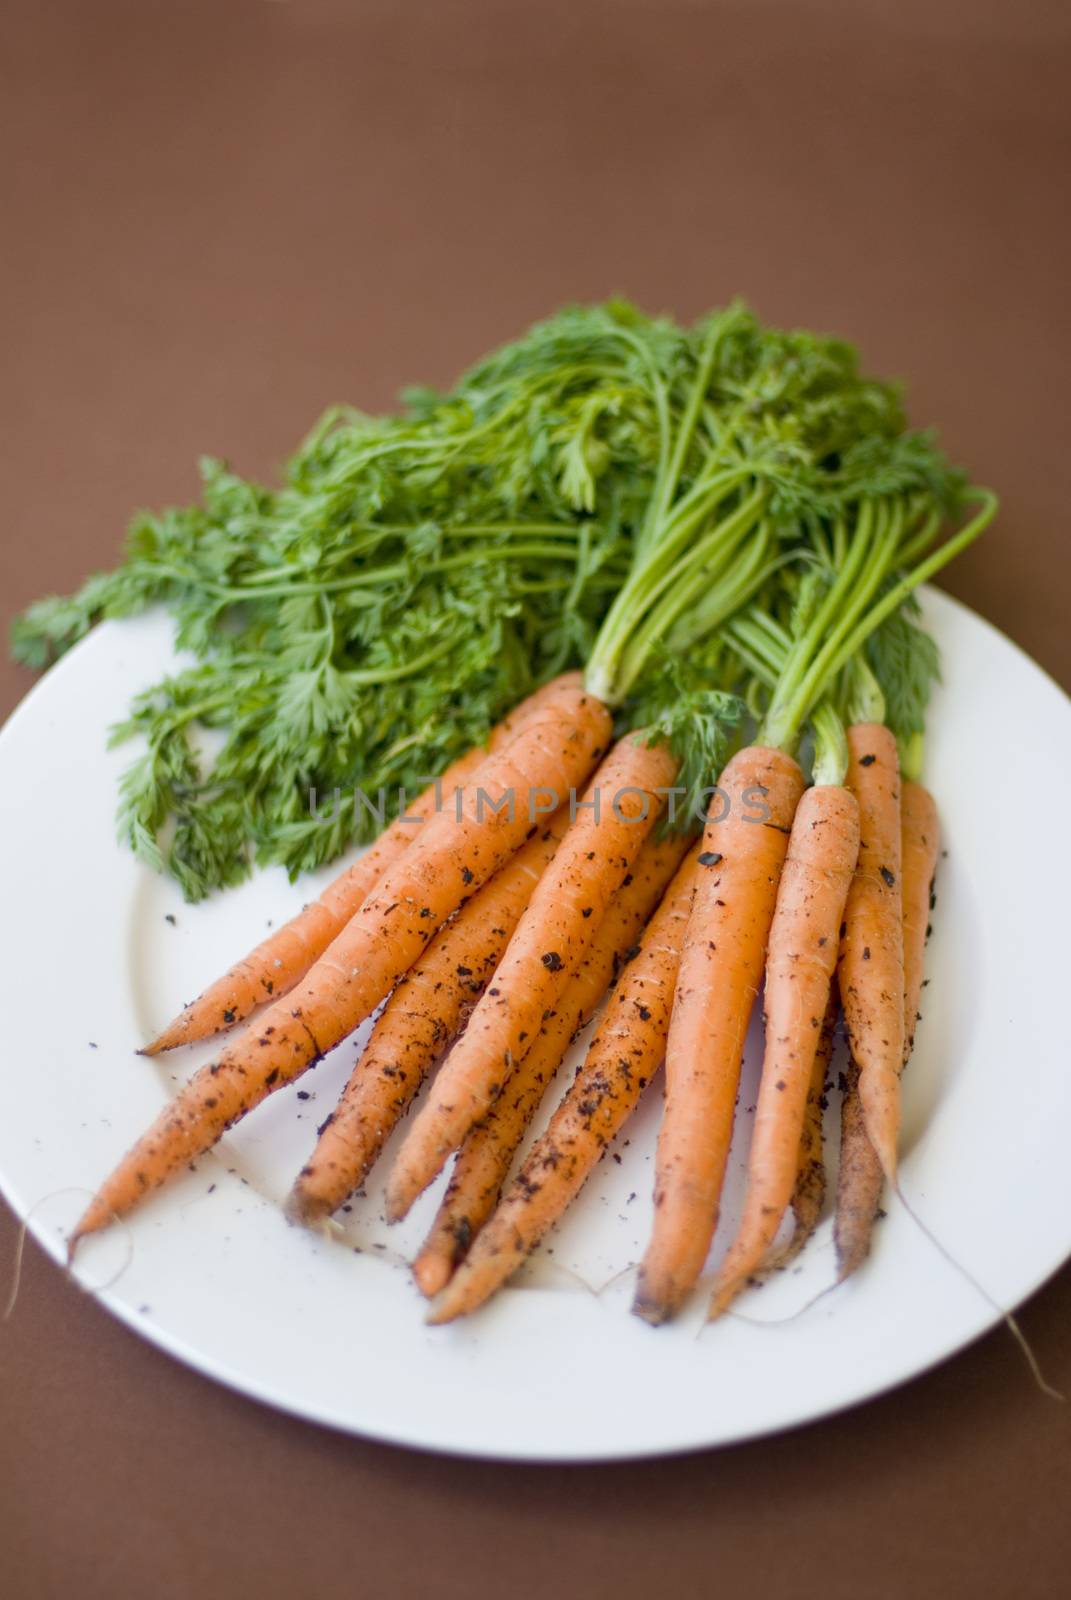 Bunch of fresh raw carrots with their leaves and adhering soil lying on a white plate ready for cleaning and cooking